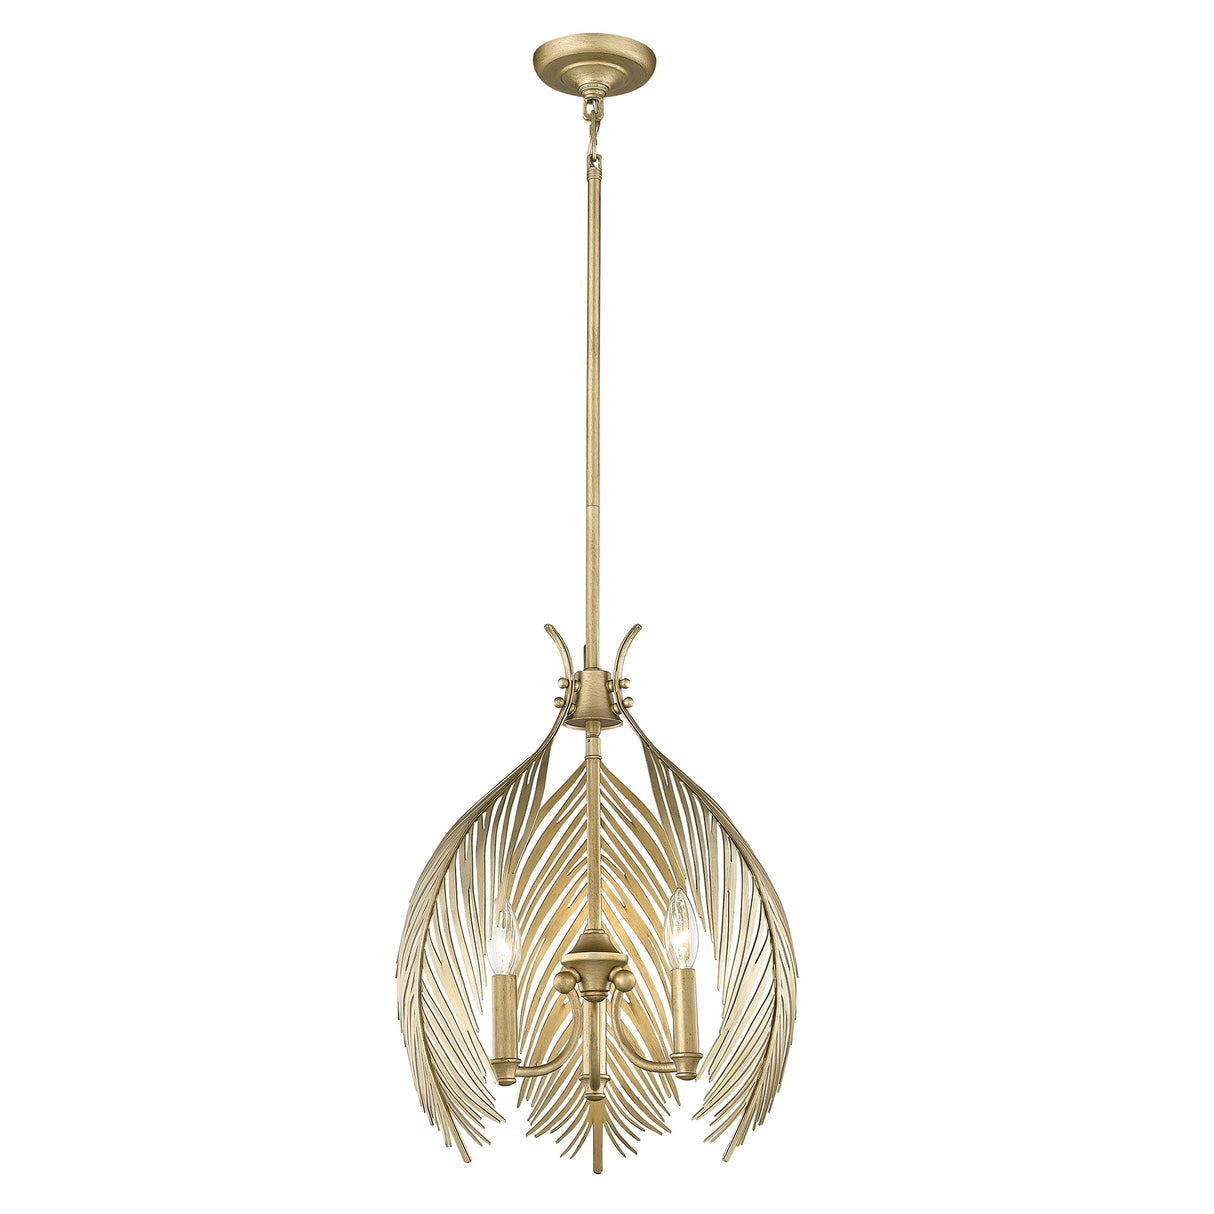 Cay 3 Light Pendant in Vintage Fired Gold